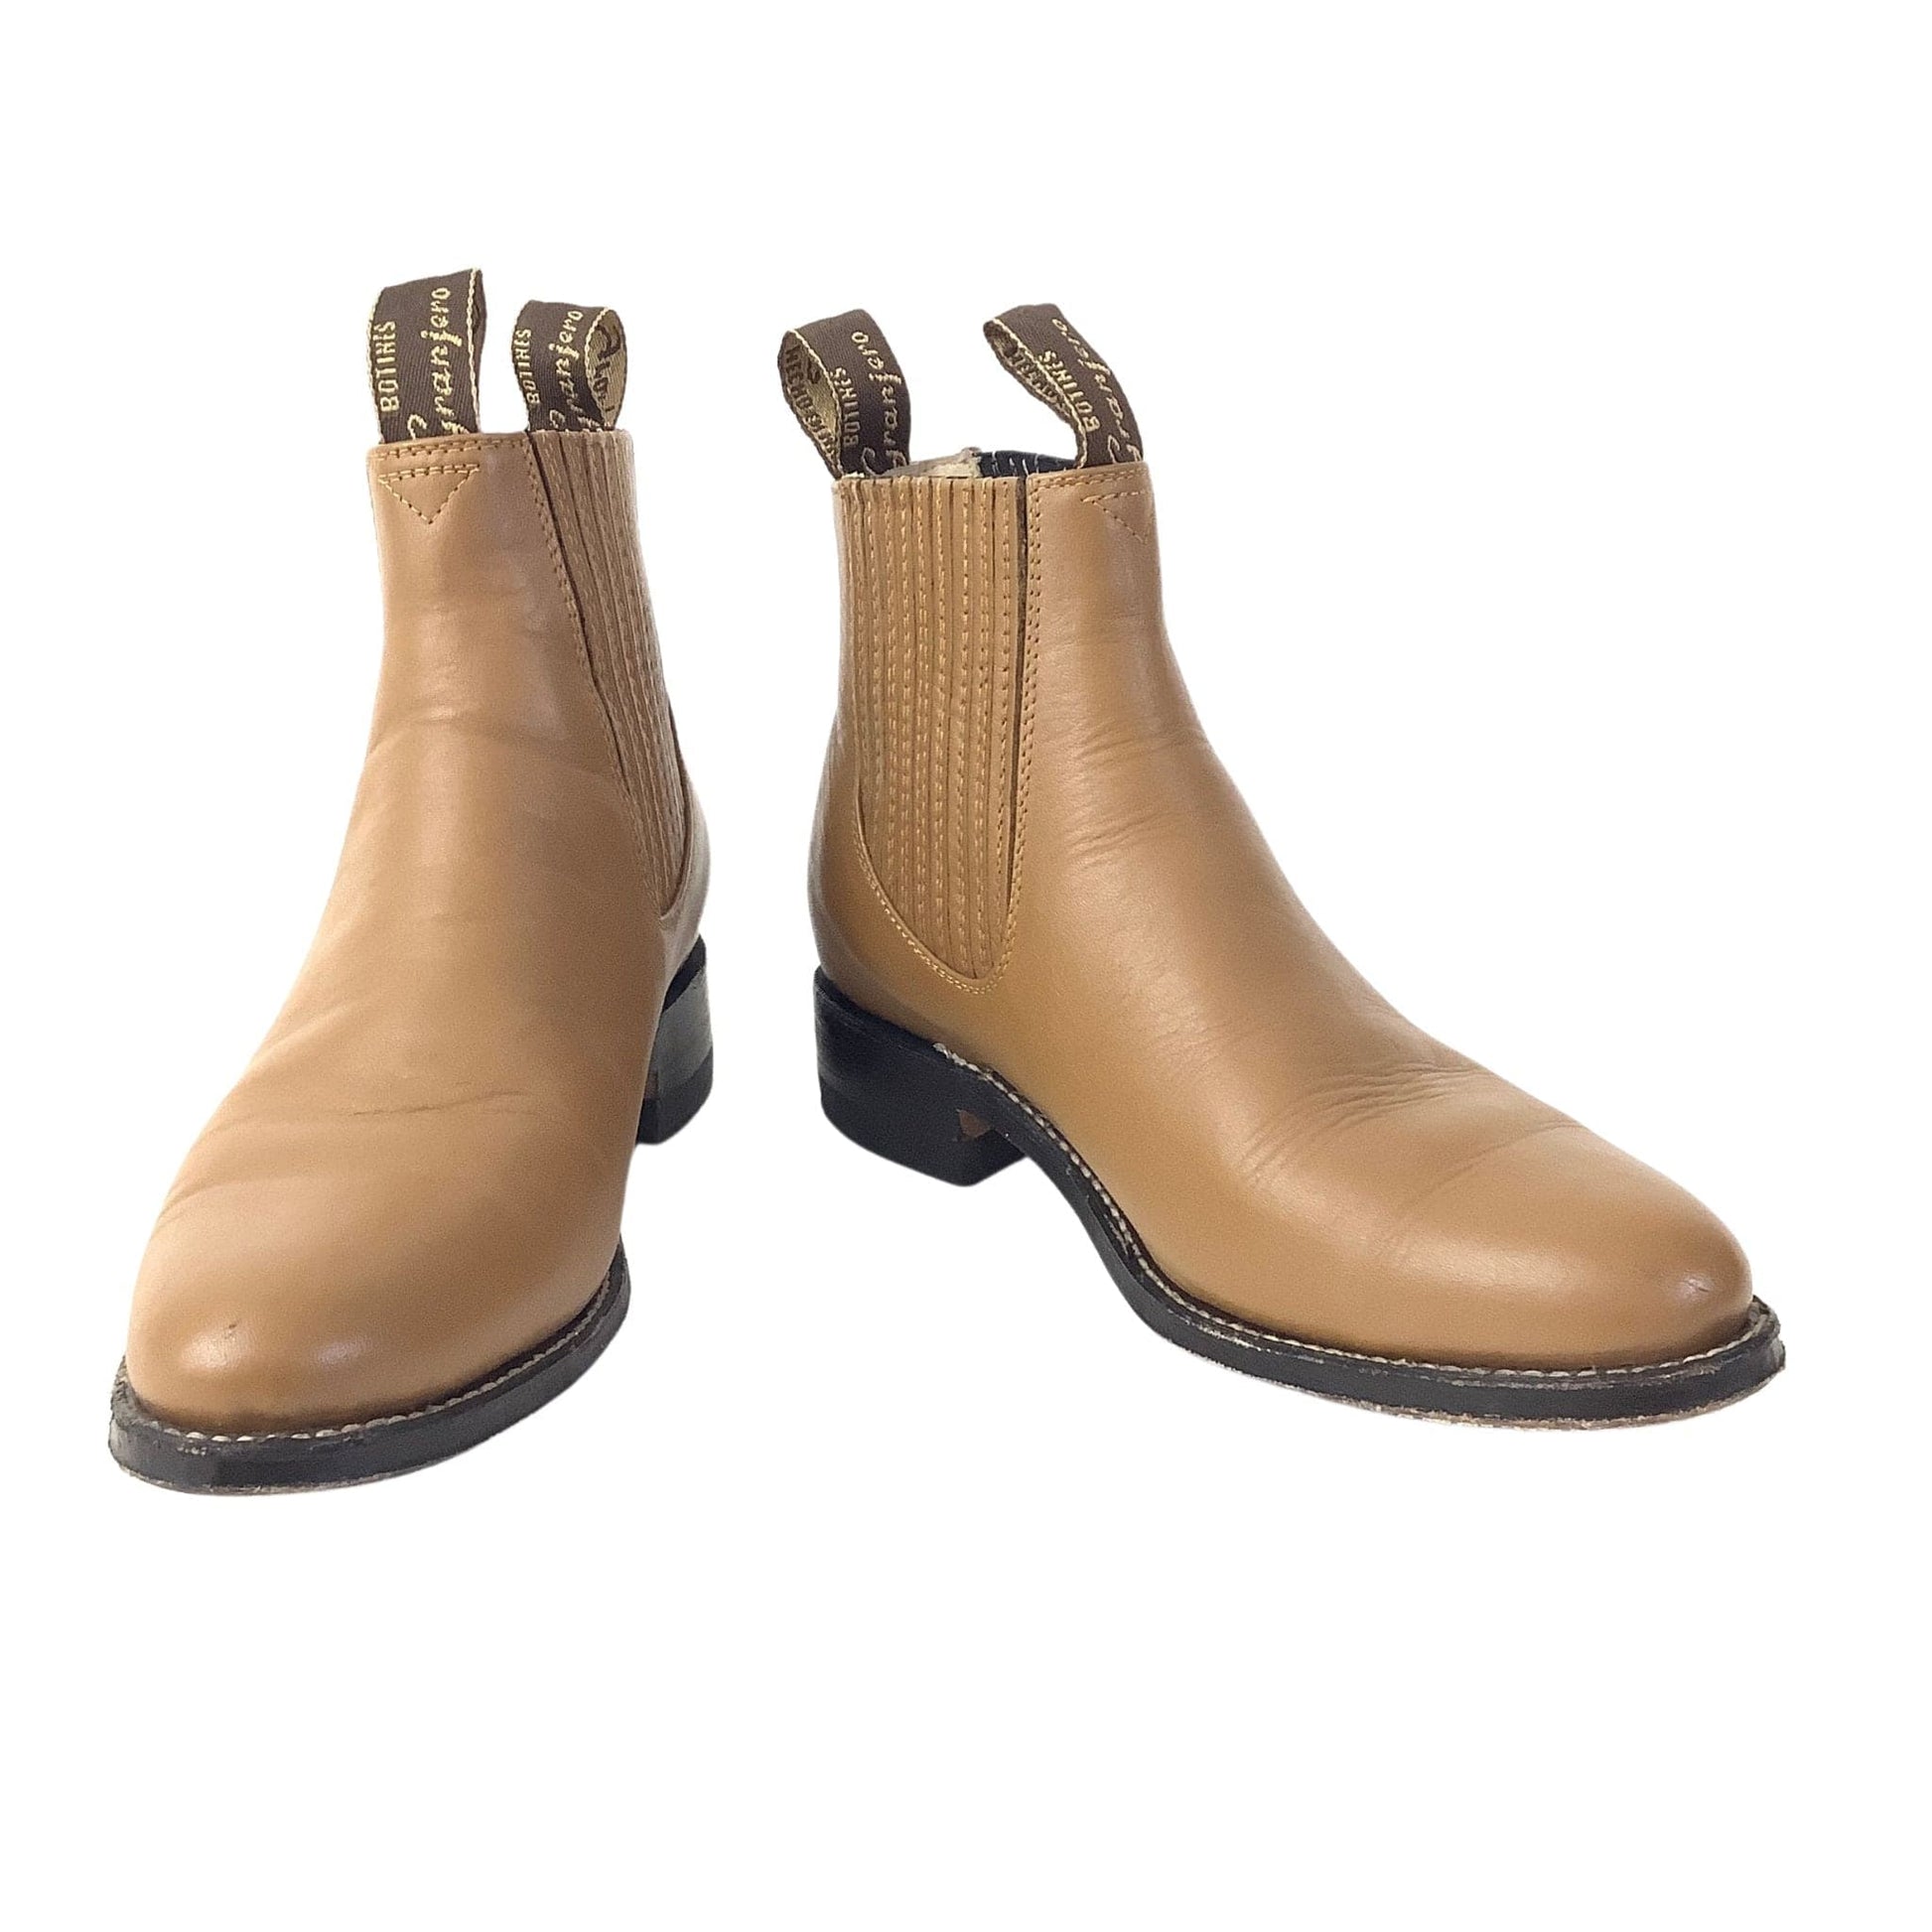 Y2K Leather Chelsea Boots 9 / Tan / Y2K - Now